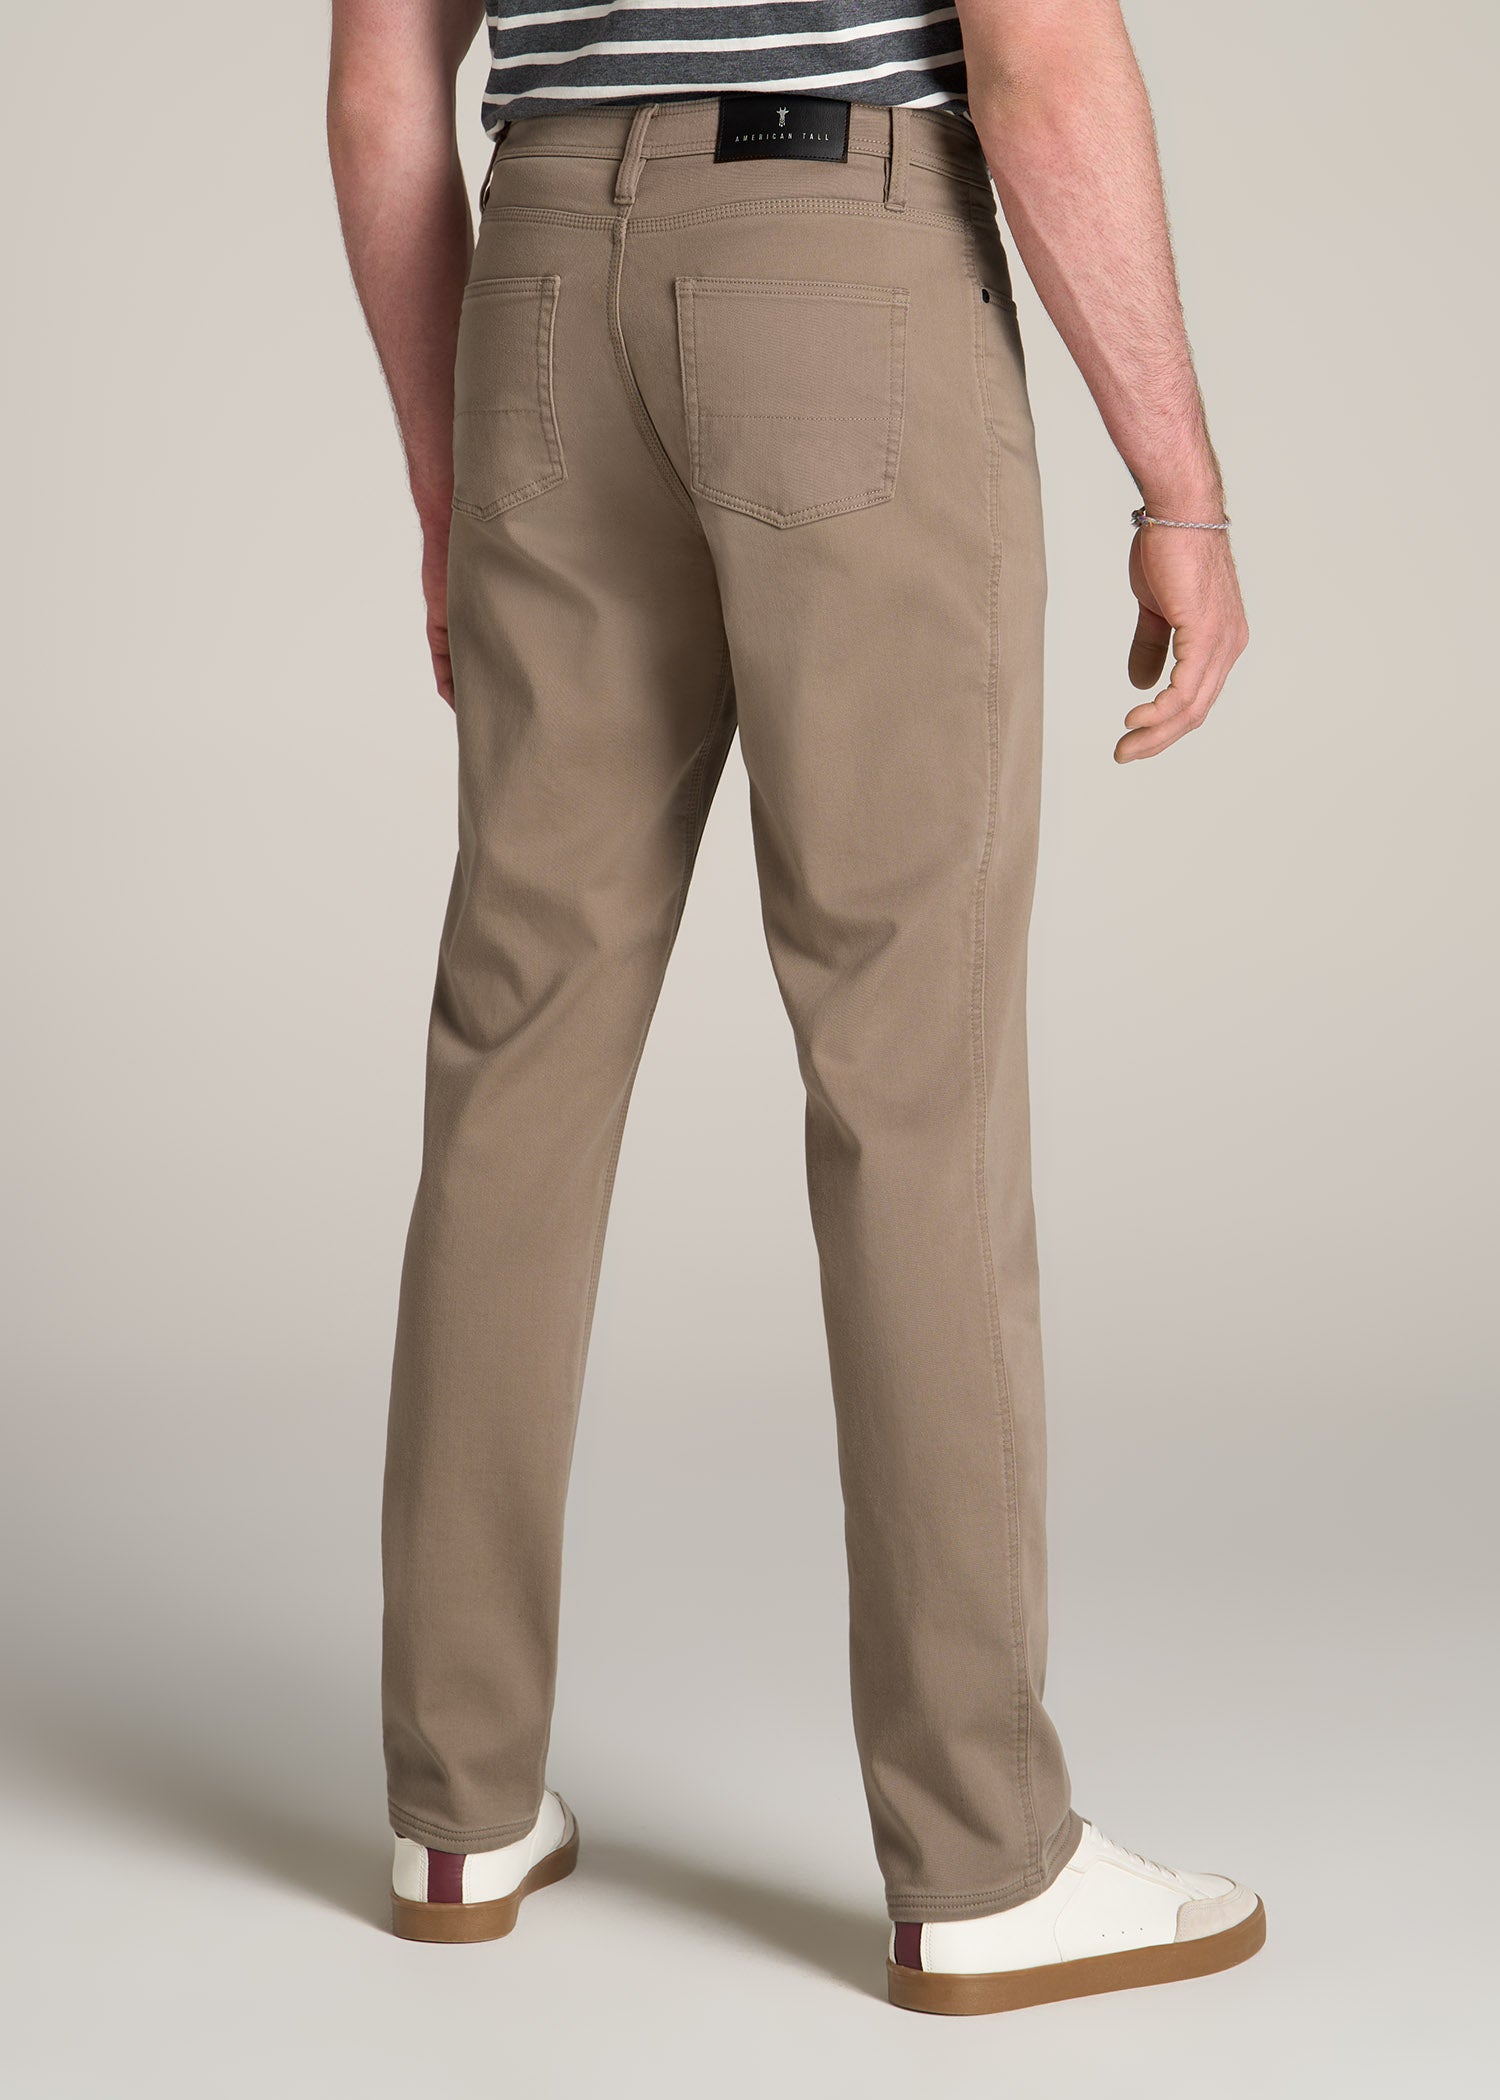 Everyday Comfort 5-Pocket Pant for Tall Men | American Tall